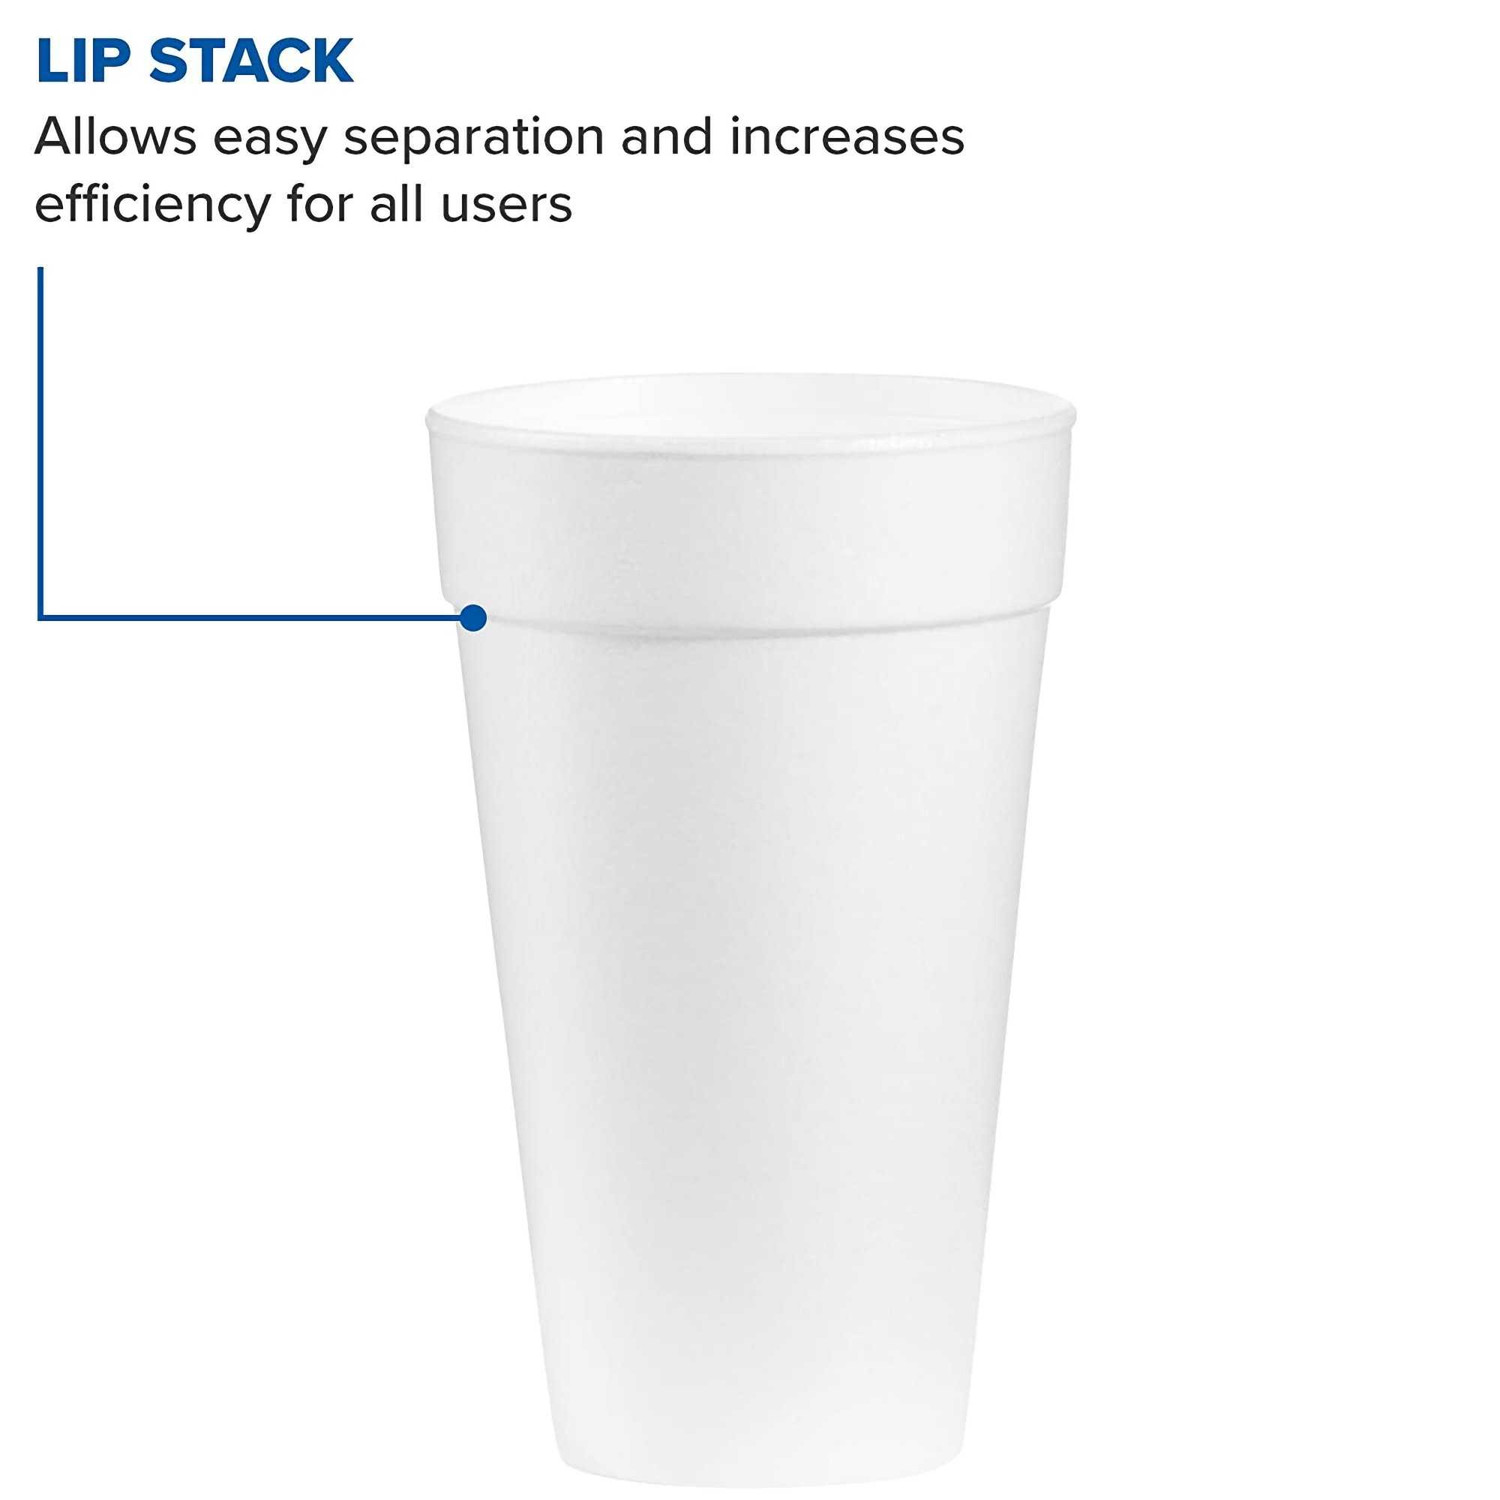 https://cdn11.bigcommerce.com/s-1l9d1d1d79/images/stencil/1500x1500/products/133617/275692/Drinking-Cup-WinCup-20-oz-White-Styrofoam-Disposable-20C18-Case500-20C18-WINCUP-871502CS_149210__88872.1682533703.jpg?c=2&imbypass=on